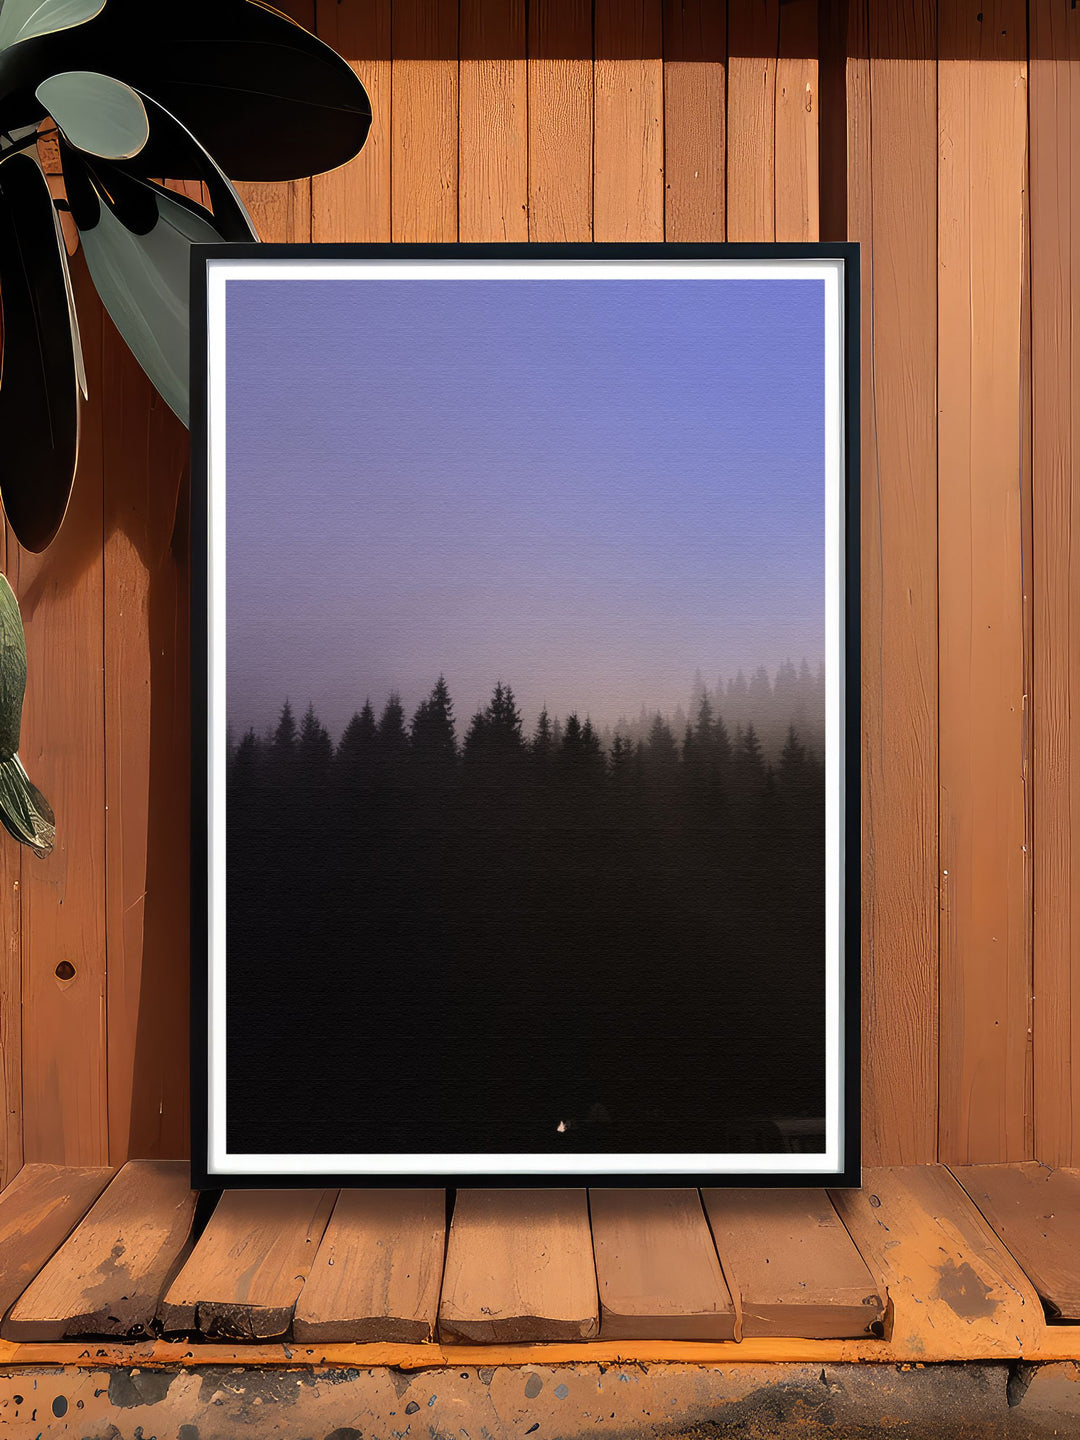 Vintage travel poster of a foggy forest, capturing the timeless and tranquil beauty of natures mist covered landscapes.